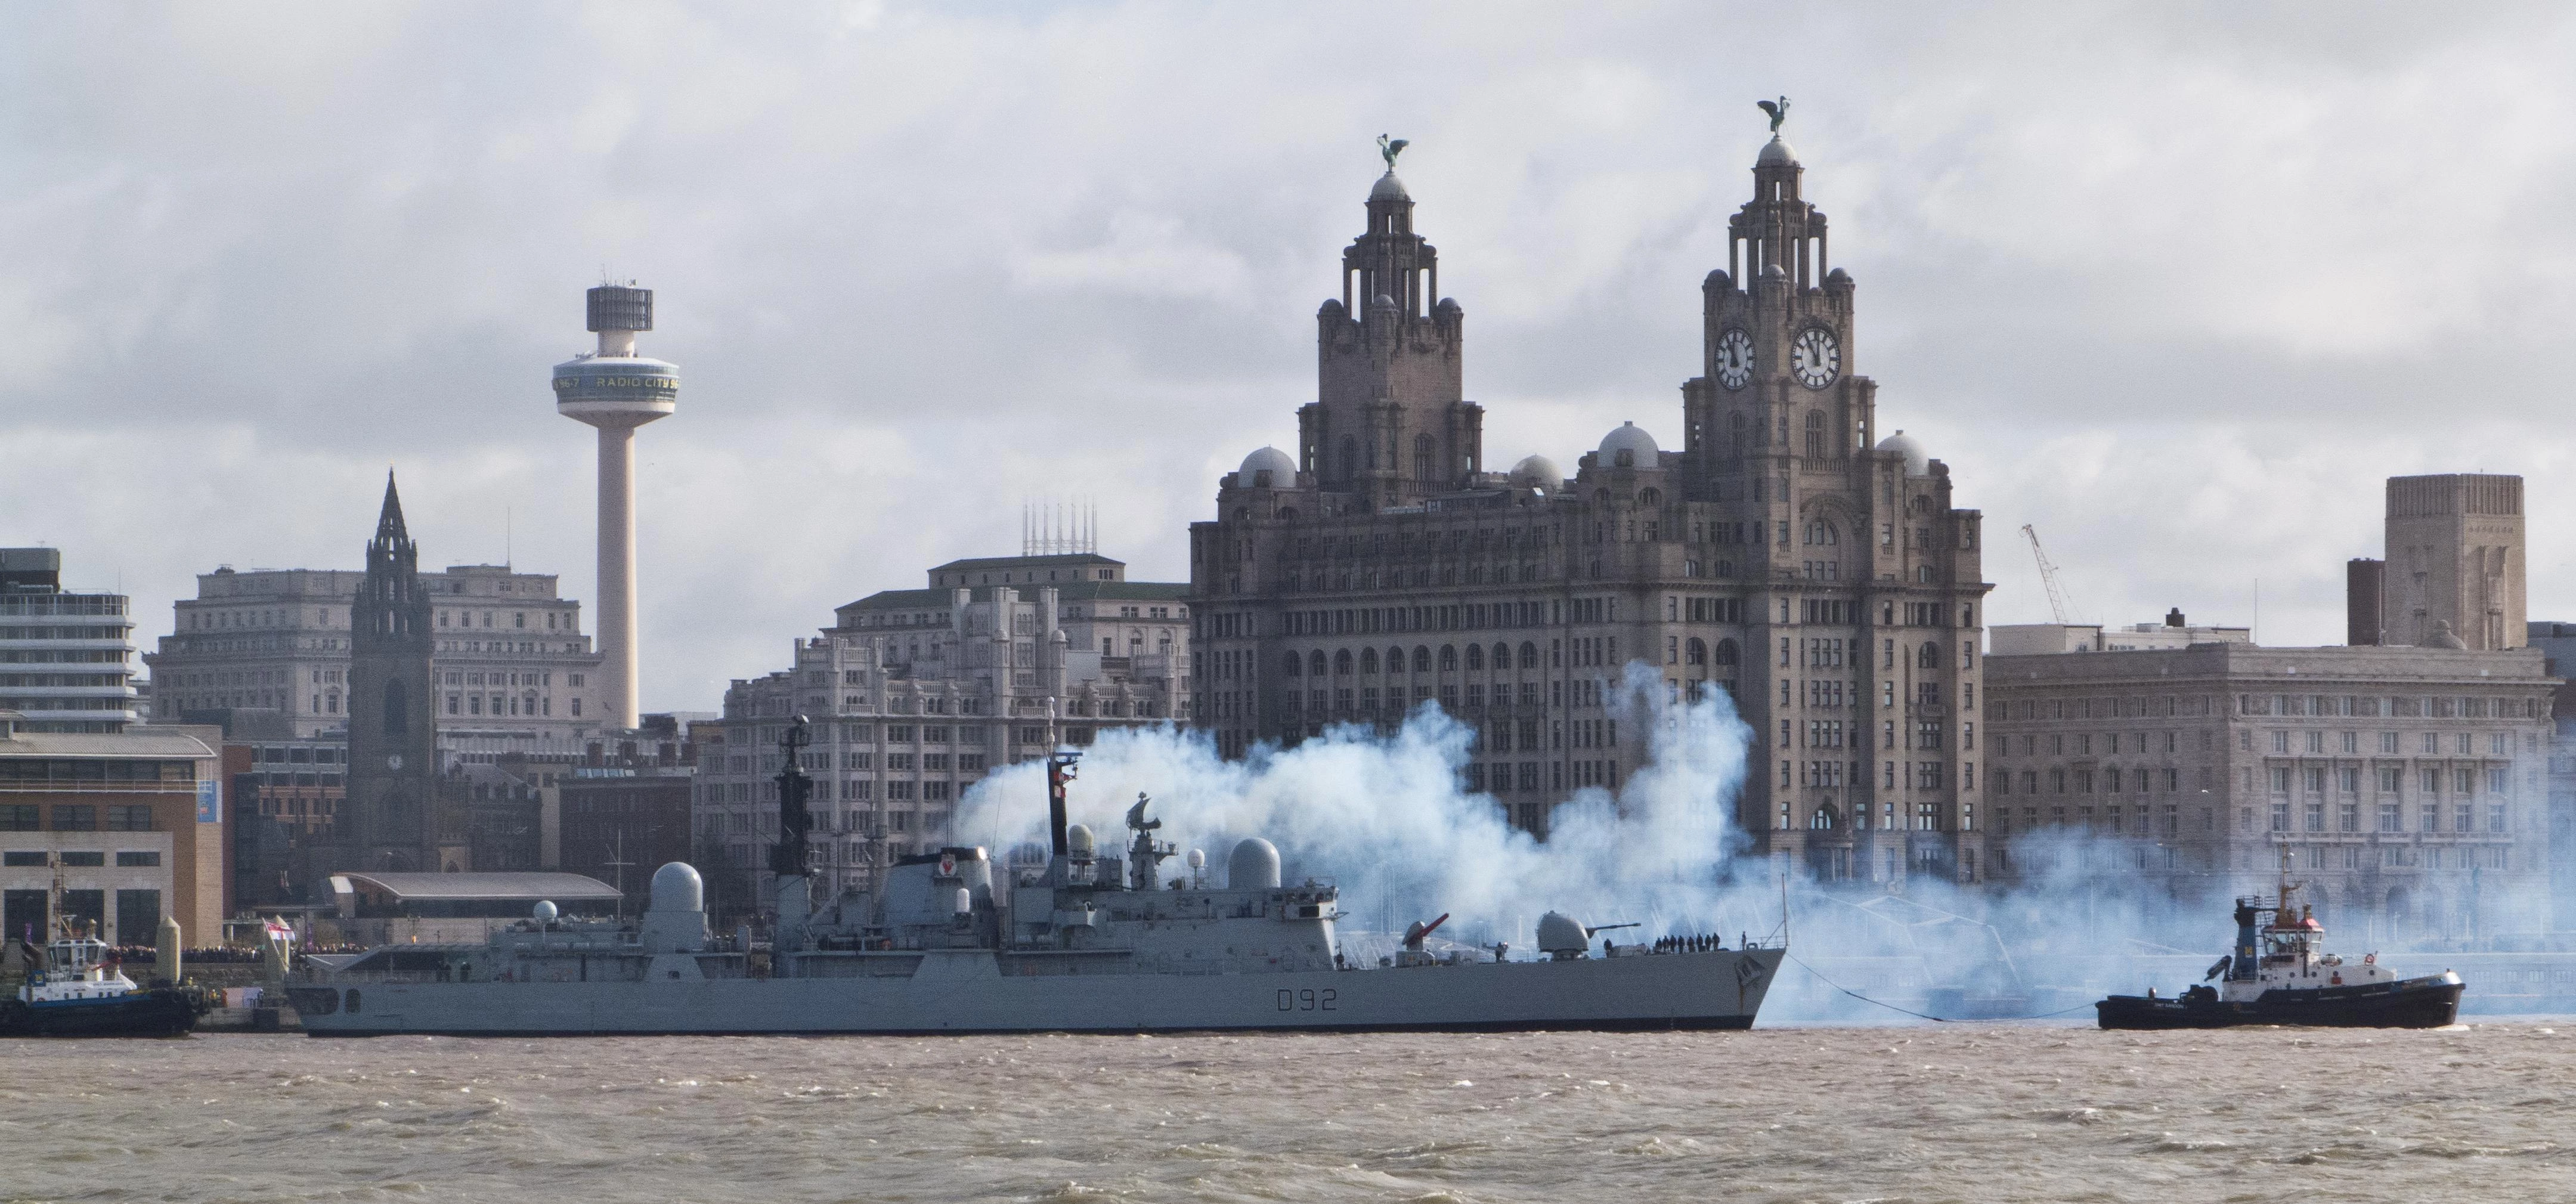 HMS Liverpool Passing the Liver Building